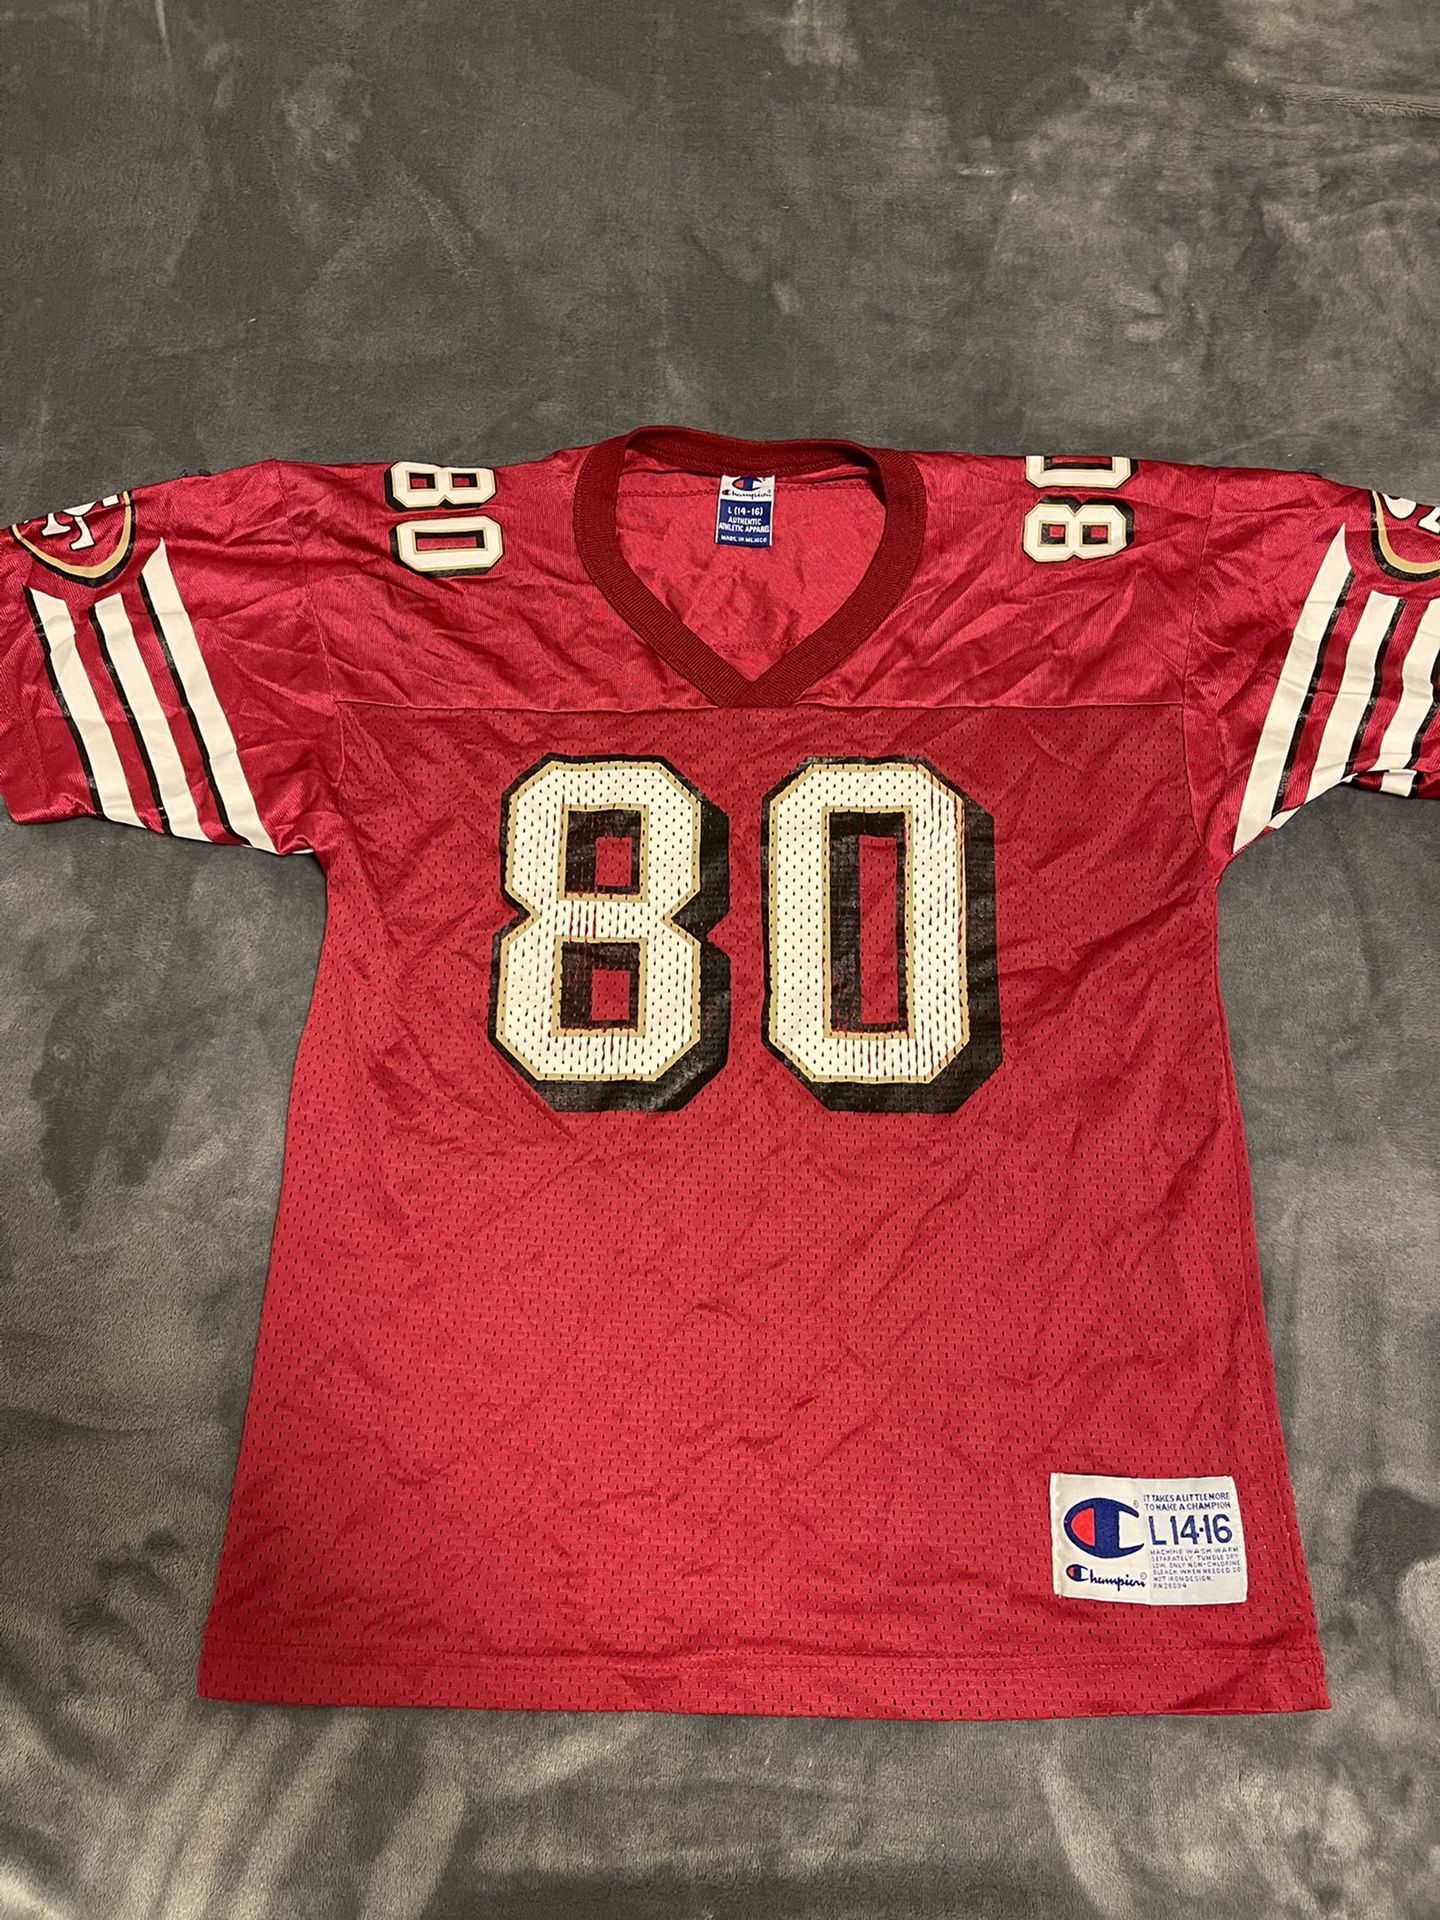 SF 49ers Size Large Jerry Rice Used San Francisco GOAT Champion 